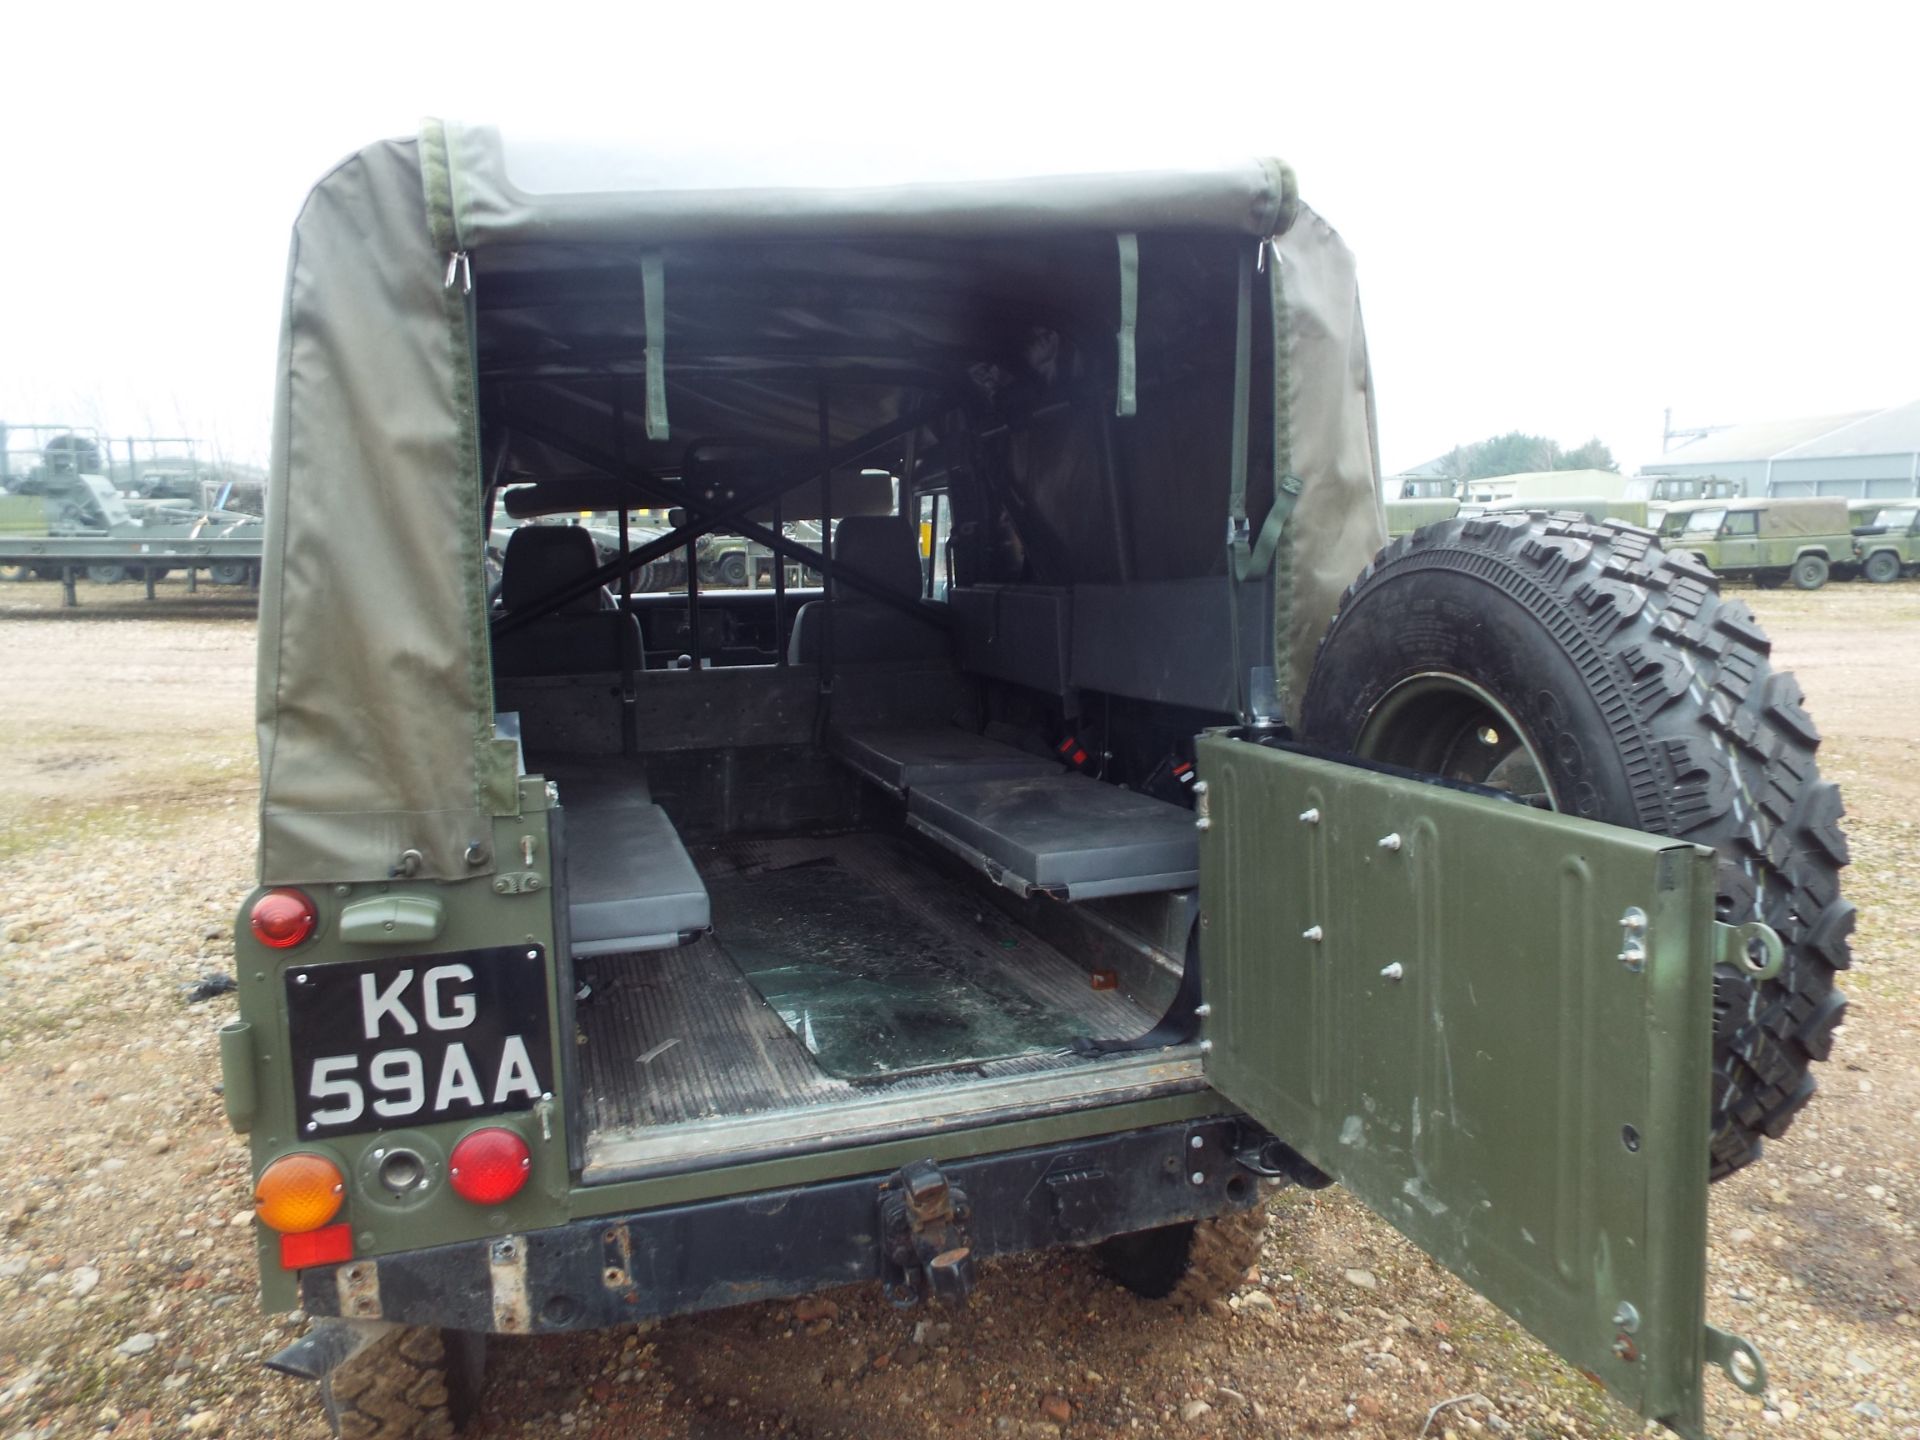 Military Specification LHD Land Rover Wolf 110 Soft Top - Image 12 of 23